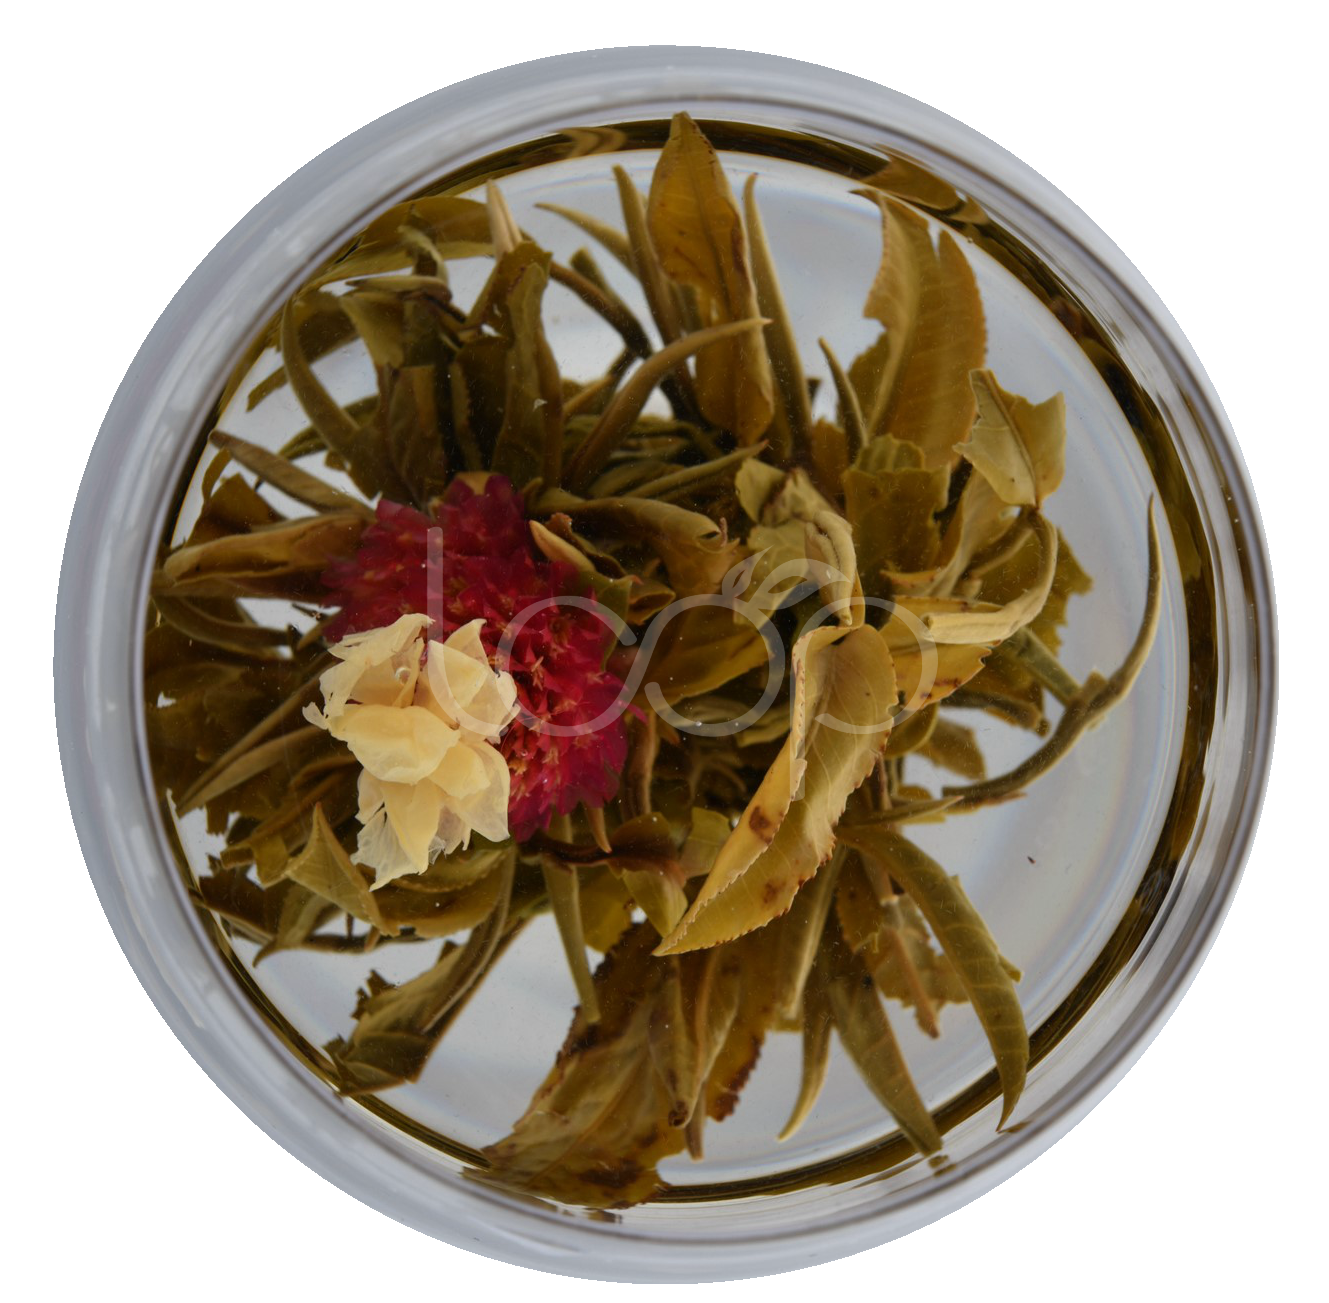 Blooming Tea Guan Yin Forest Featured Image